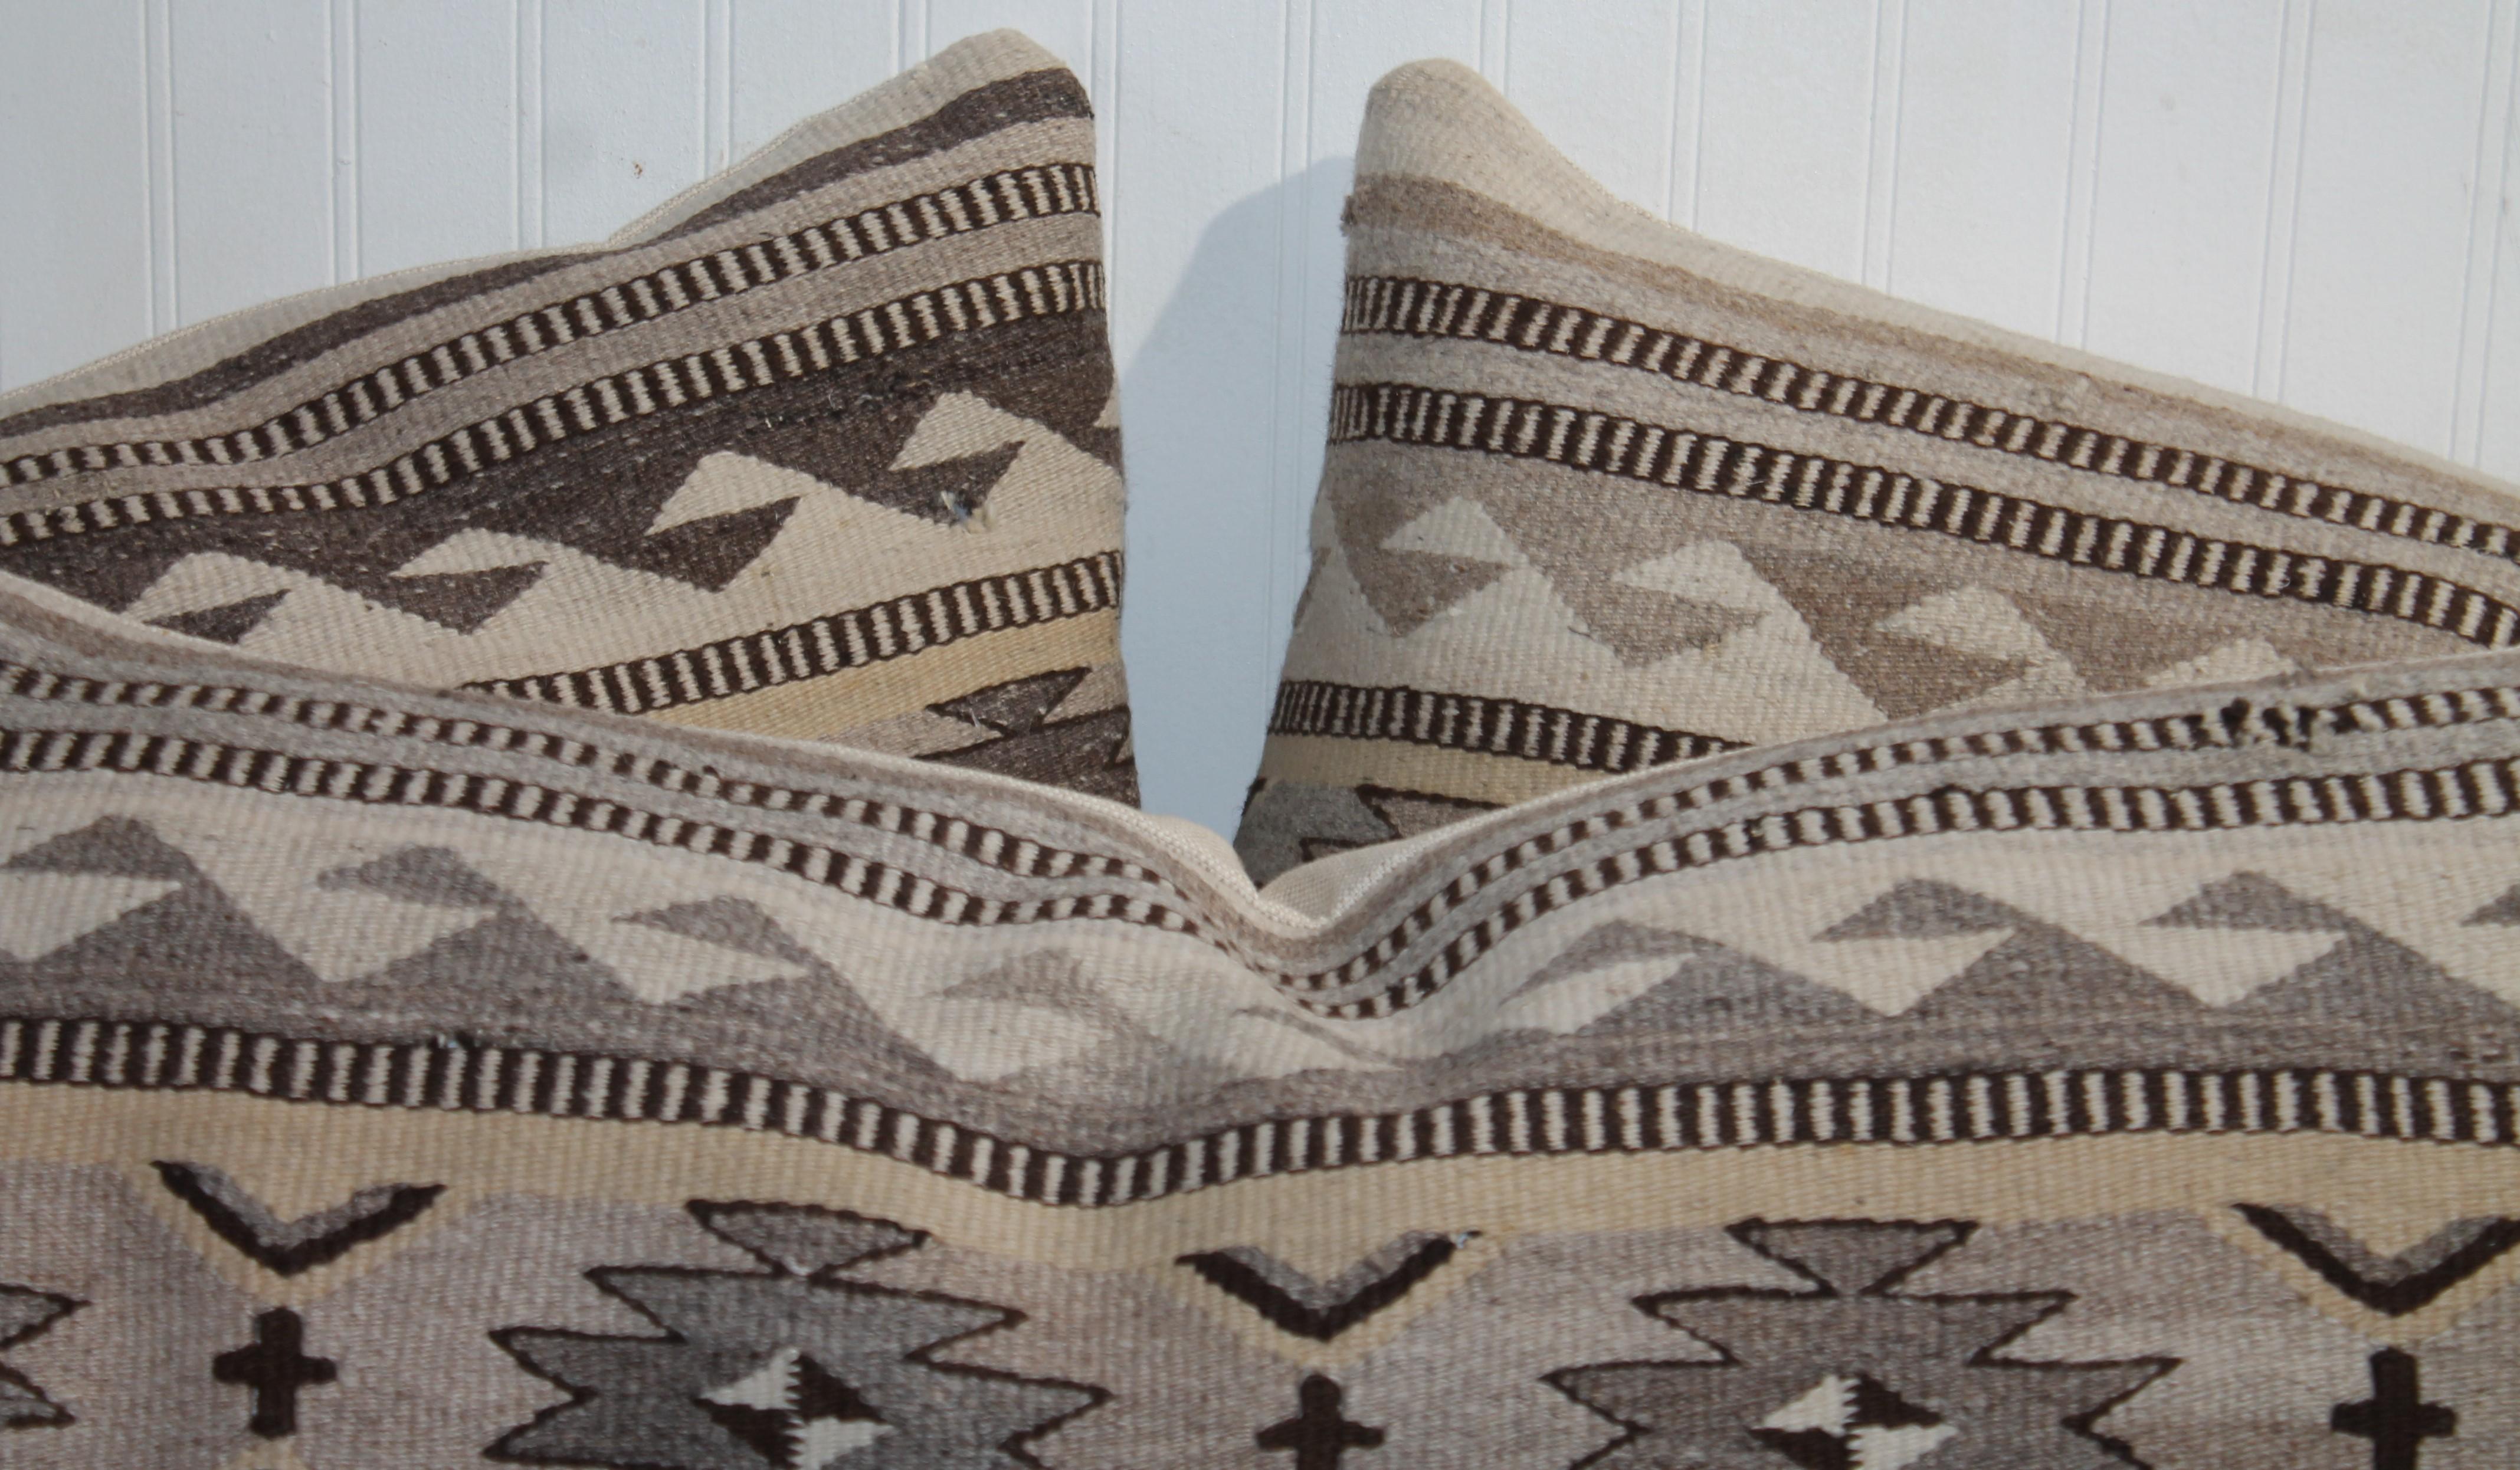 American Collection of Three Mexican Indian Weaving Geometric Pillows -3 For Sale